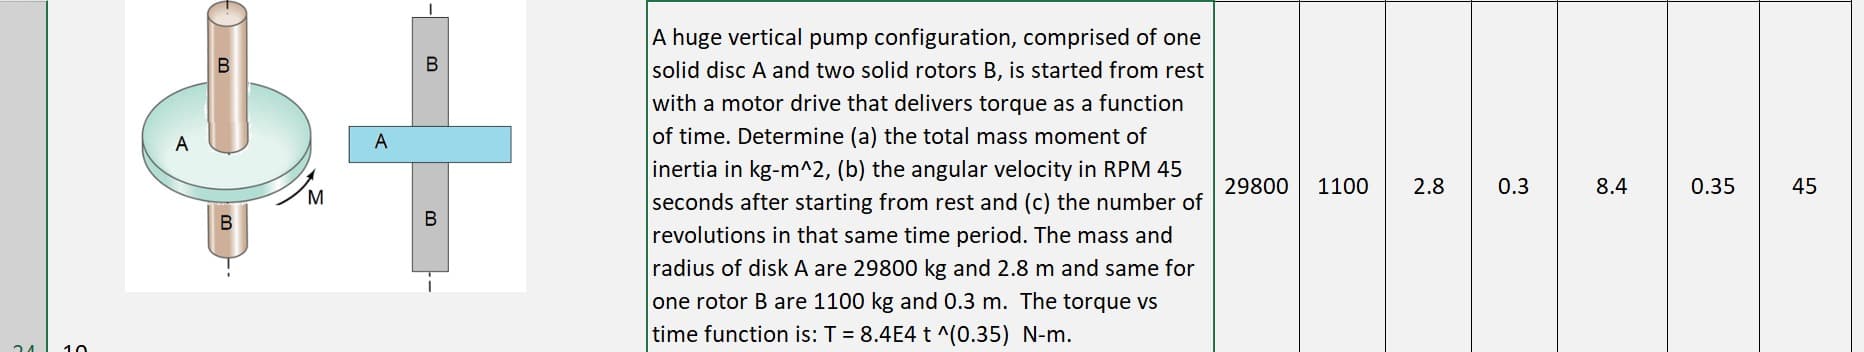 A huge vertical pump configuration, comprised of one
solid disc A and two solid rotors B, is started from rest
with a motor drive that delivers torque as a function
of time. Determine (a) the total mass moment of
inertia in kg-m^2, (b) the angular velocity in RPM 45
seconds after starting from rest and (c) the number of
revolutions in that same time period. The mass and
radius of disk A are 29800 kg and 2.8 m and same for
one rotor B are 1100 kg and 0.3 m. The torque vs
time function is: T = 8.4E4 t ^(0.35) N-m.
B
29800
1100
2.8
0.3
8.4
0.35
45
